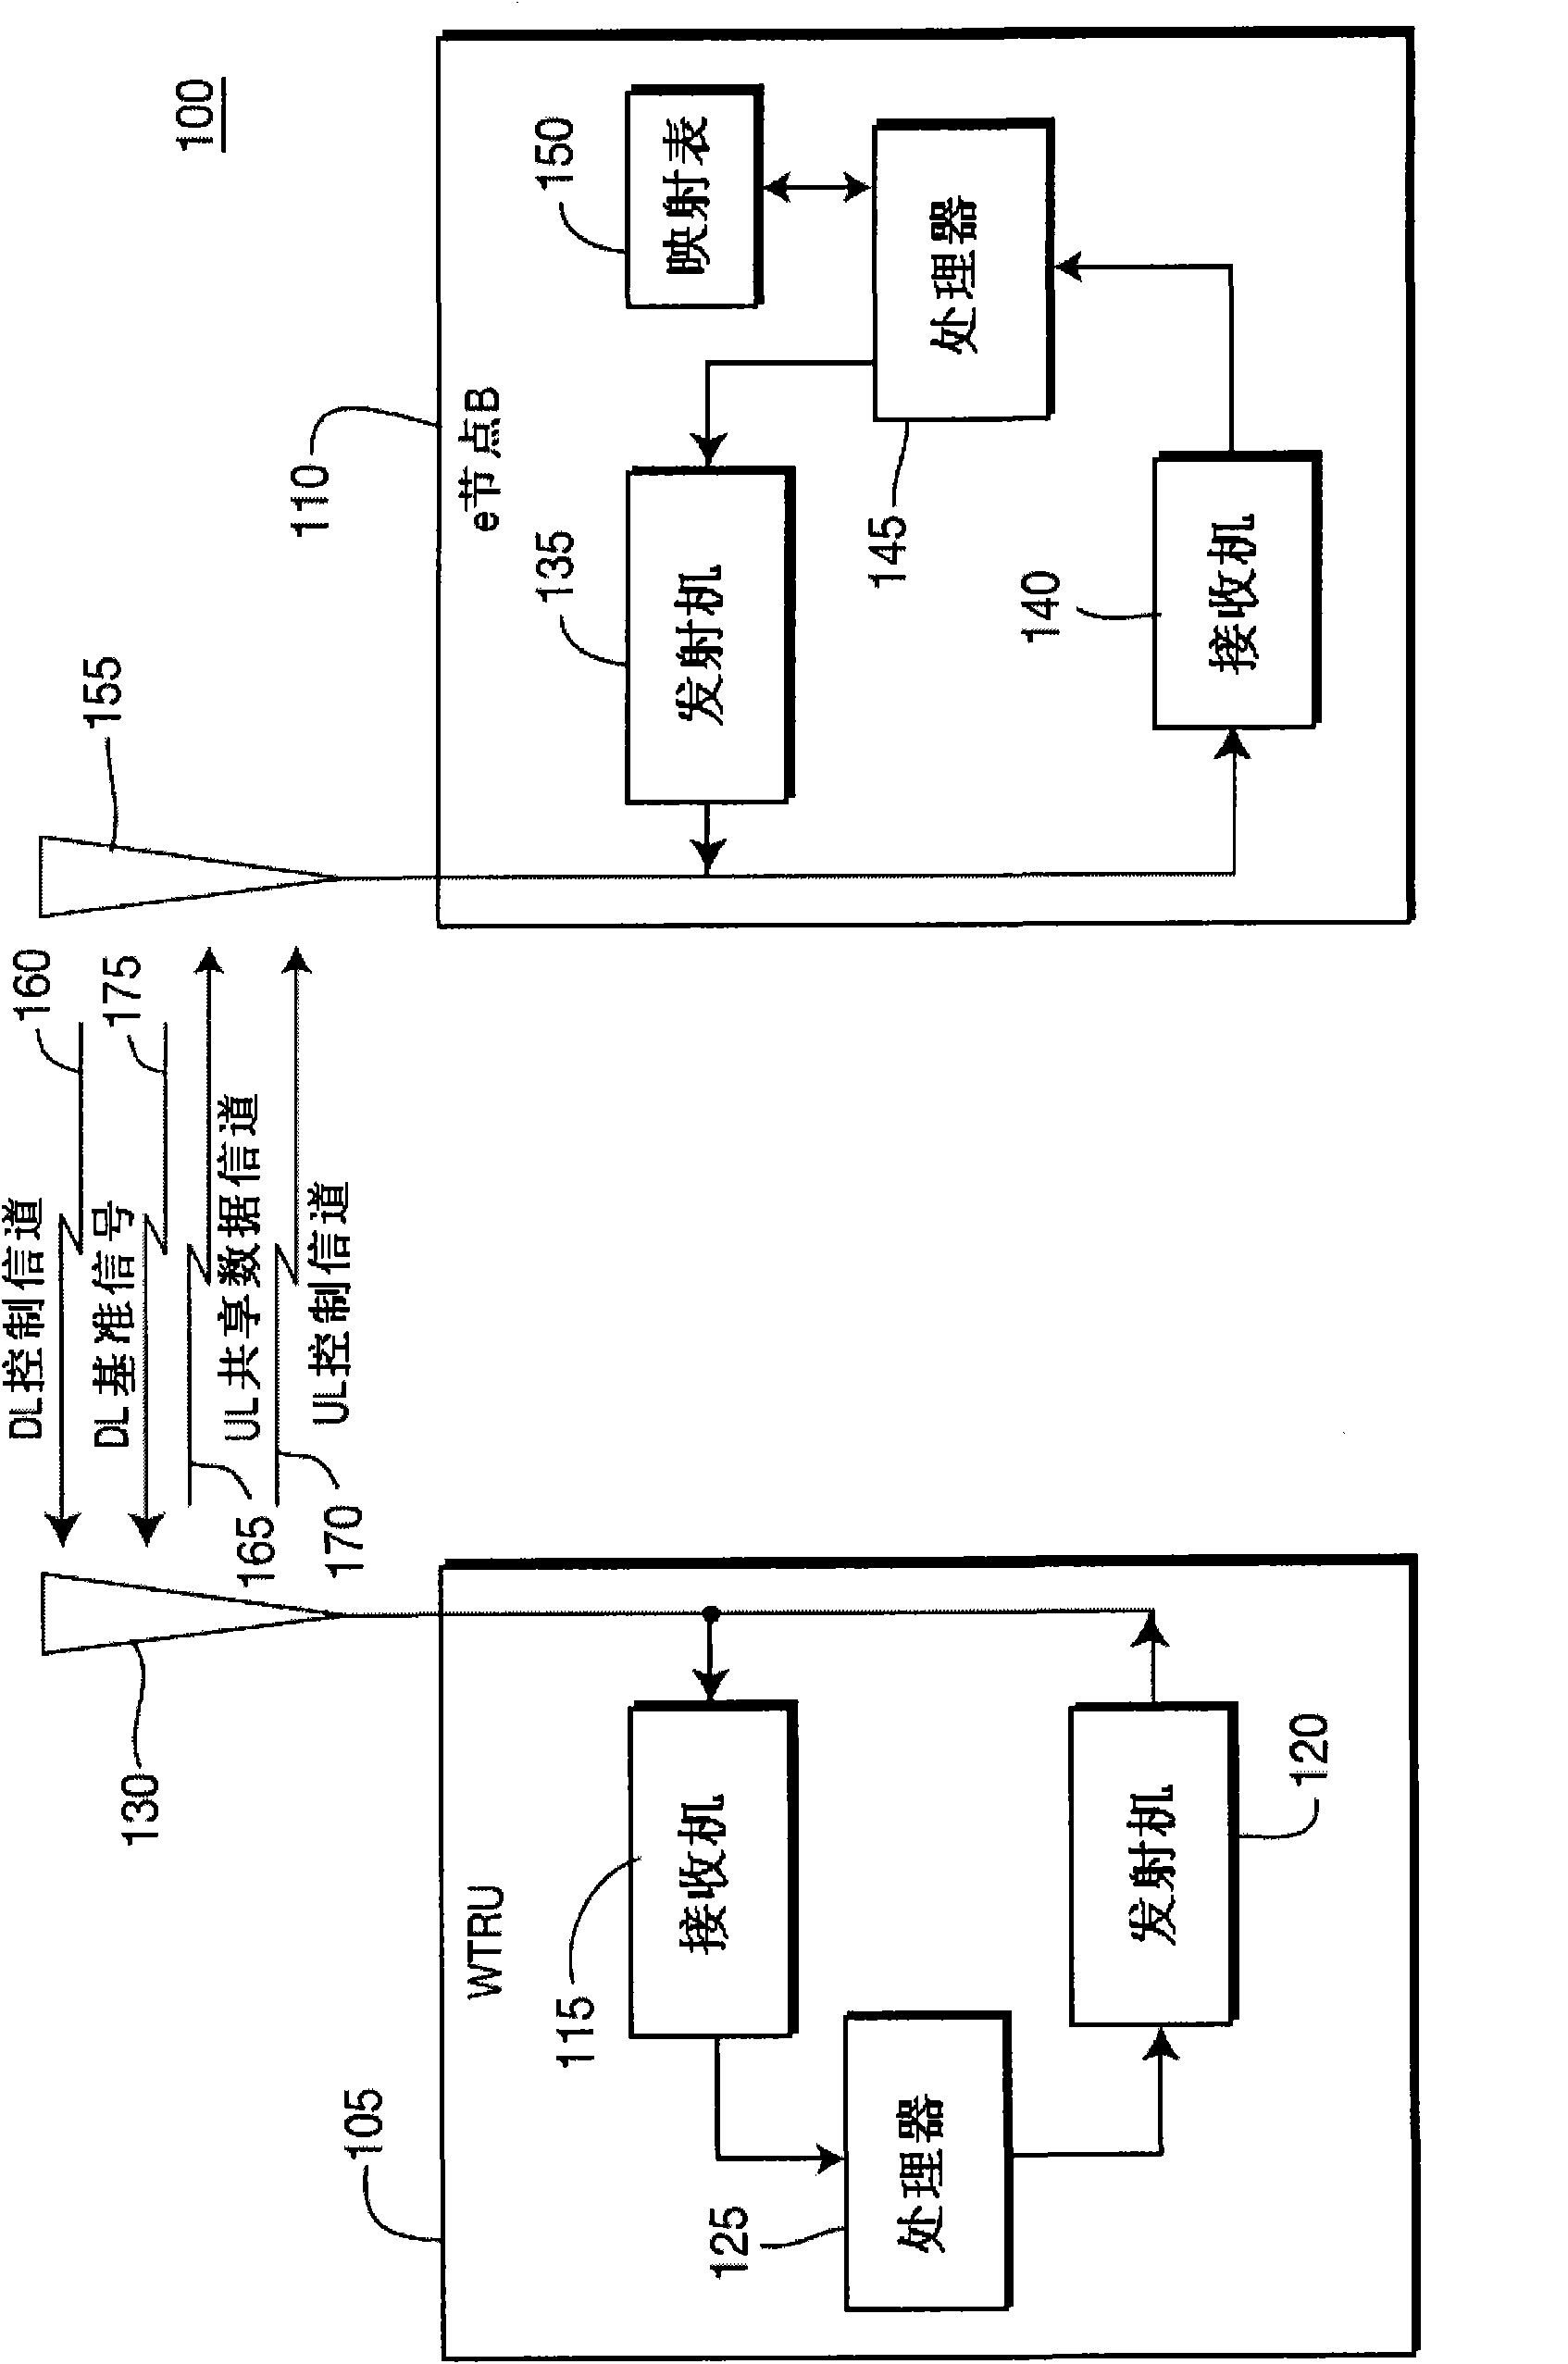 Combined open loop/closed loop (CQI-based) uplink transmit power control with interference mitigation for E-UTRA